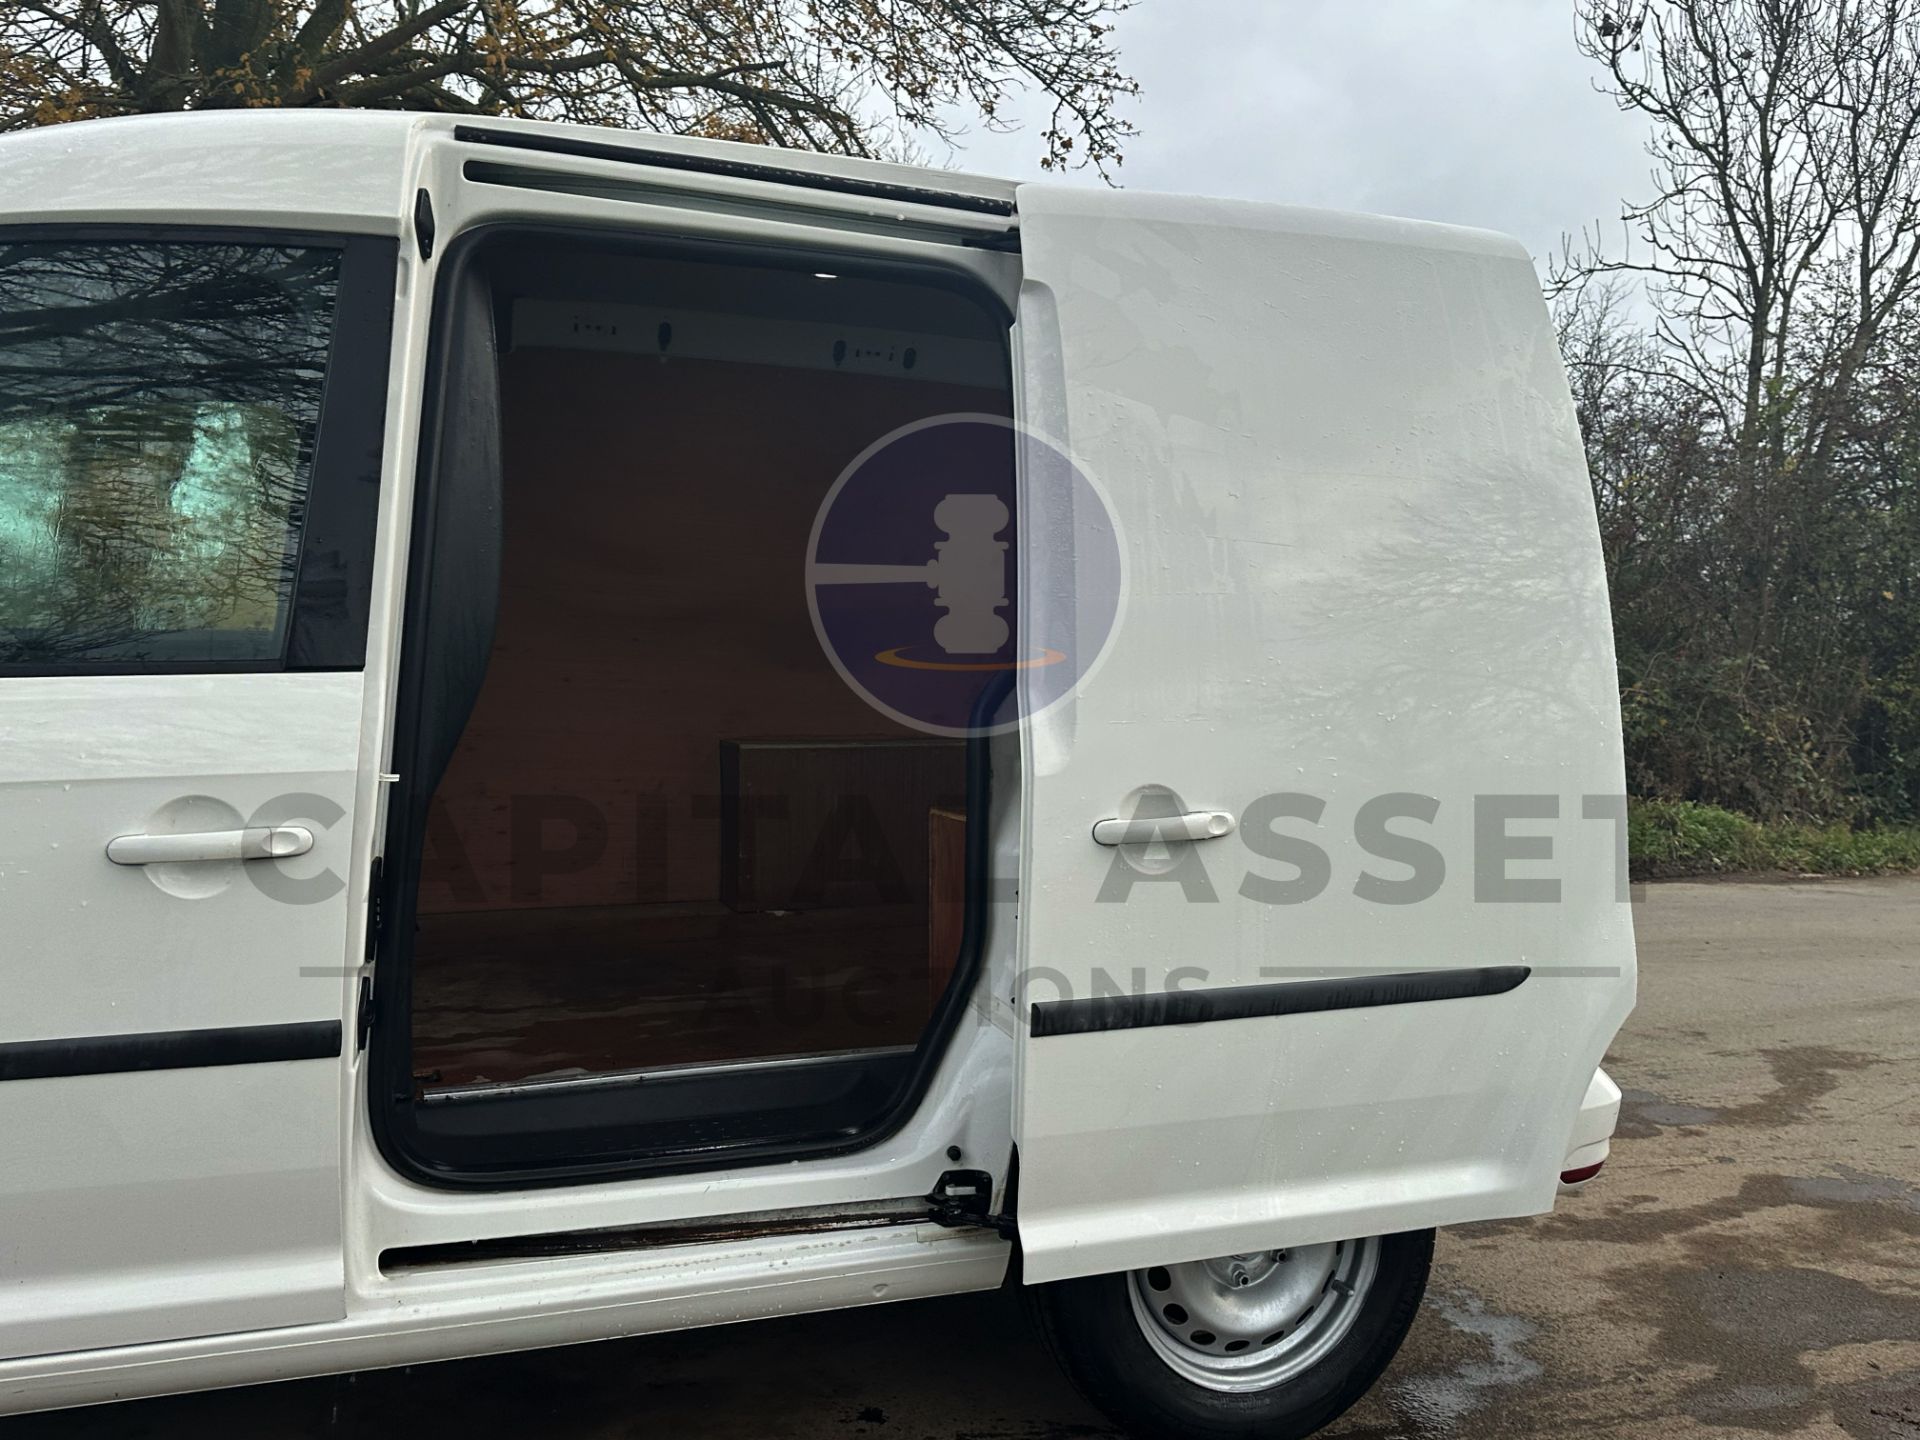 (On Sale) VOLKSWAGEN CADDY 2.0TDI BMT *TRENDLINE EDITION* 1 OWNER FSH (2019 MODEL) AIR CON - EURO 6 - Image 20 of 38